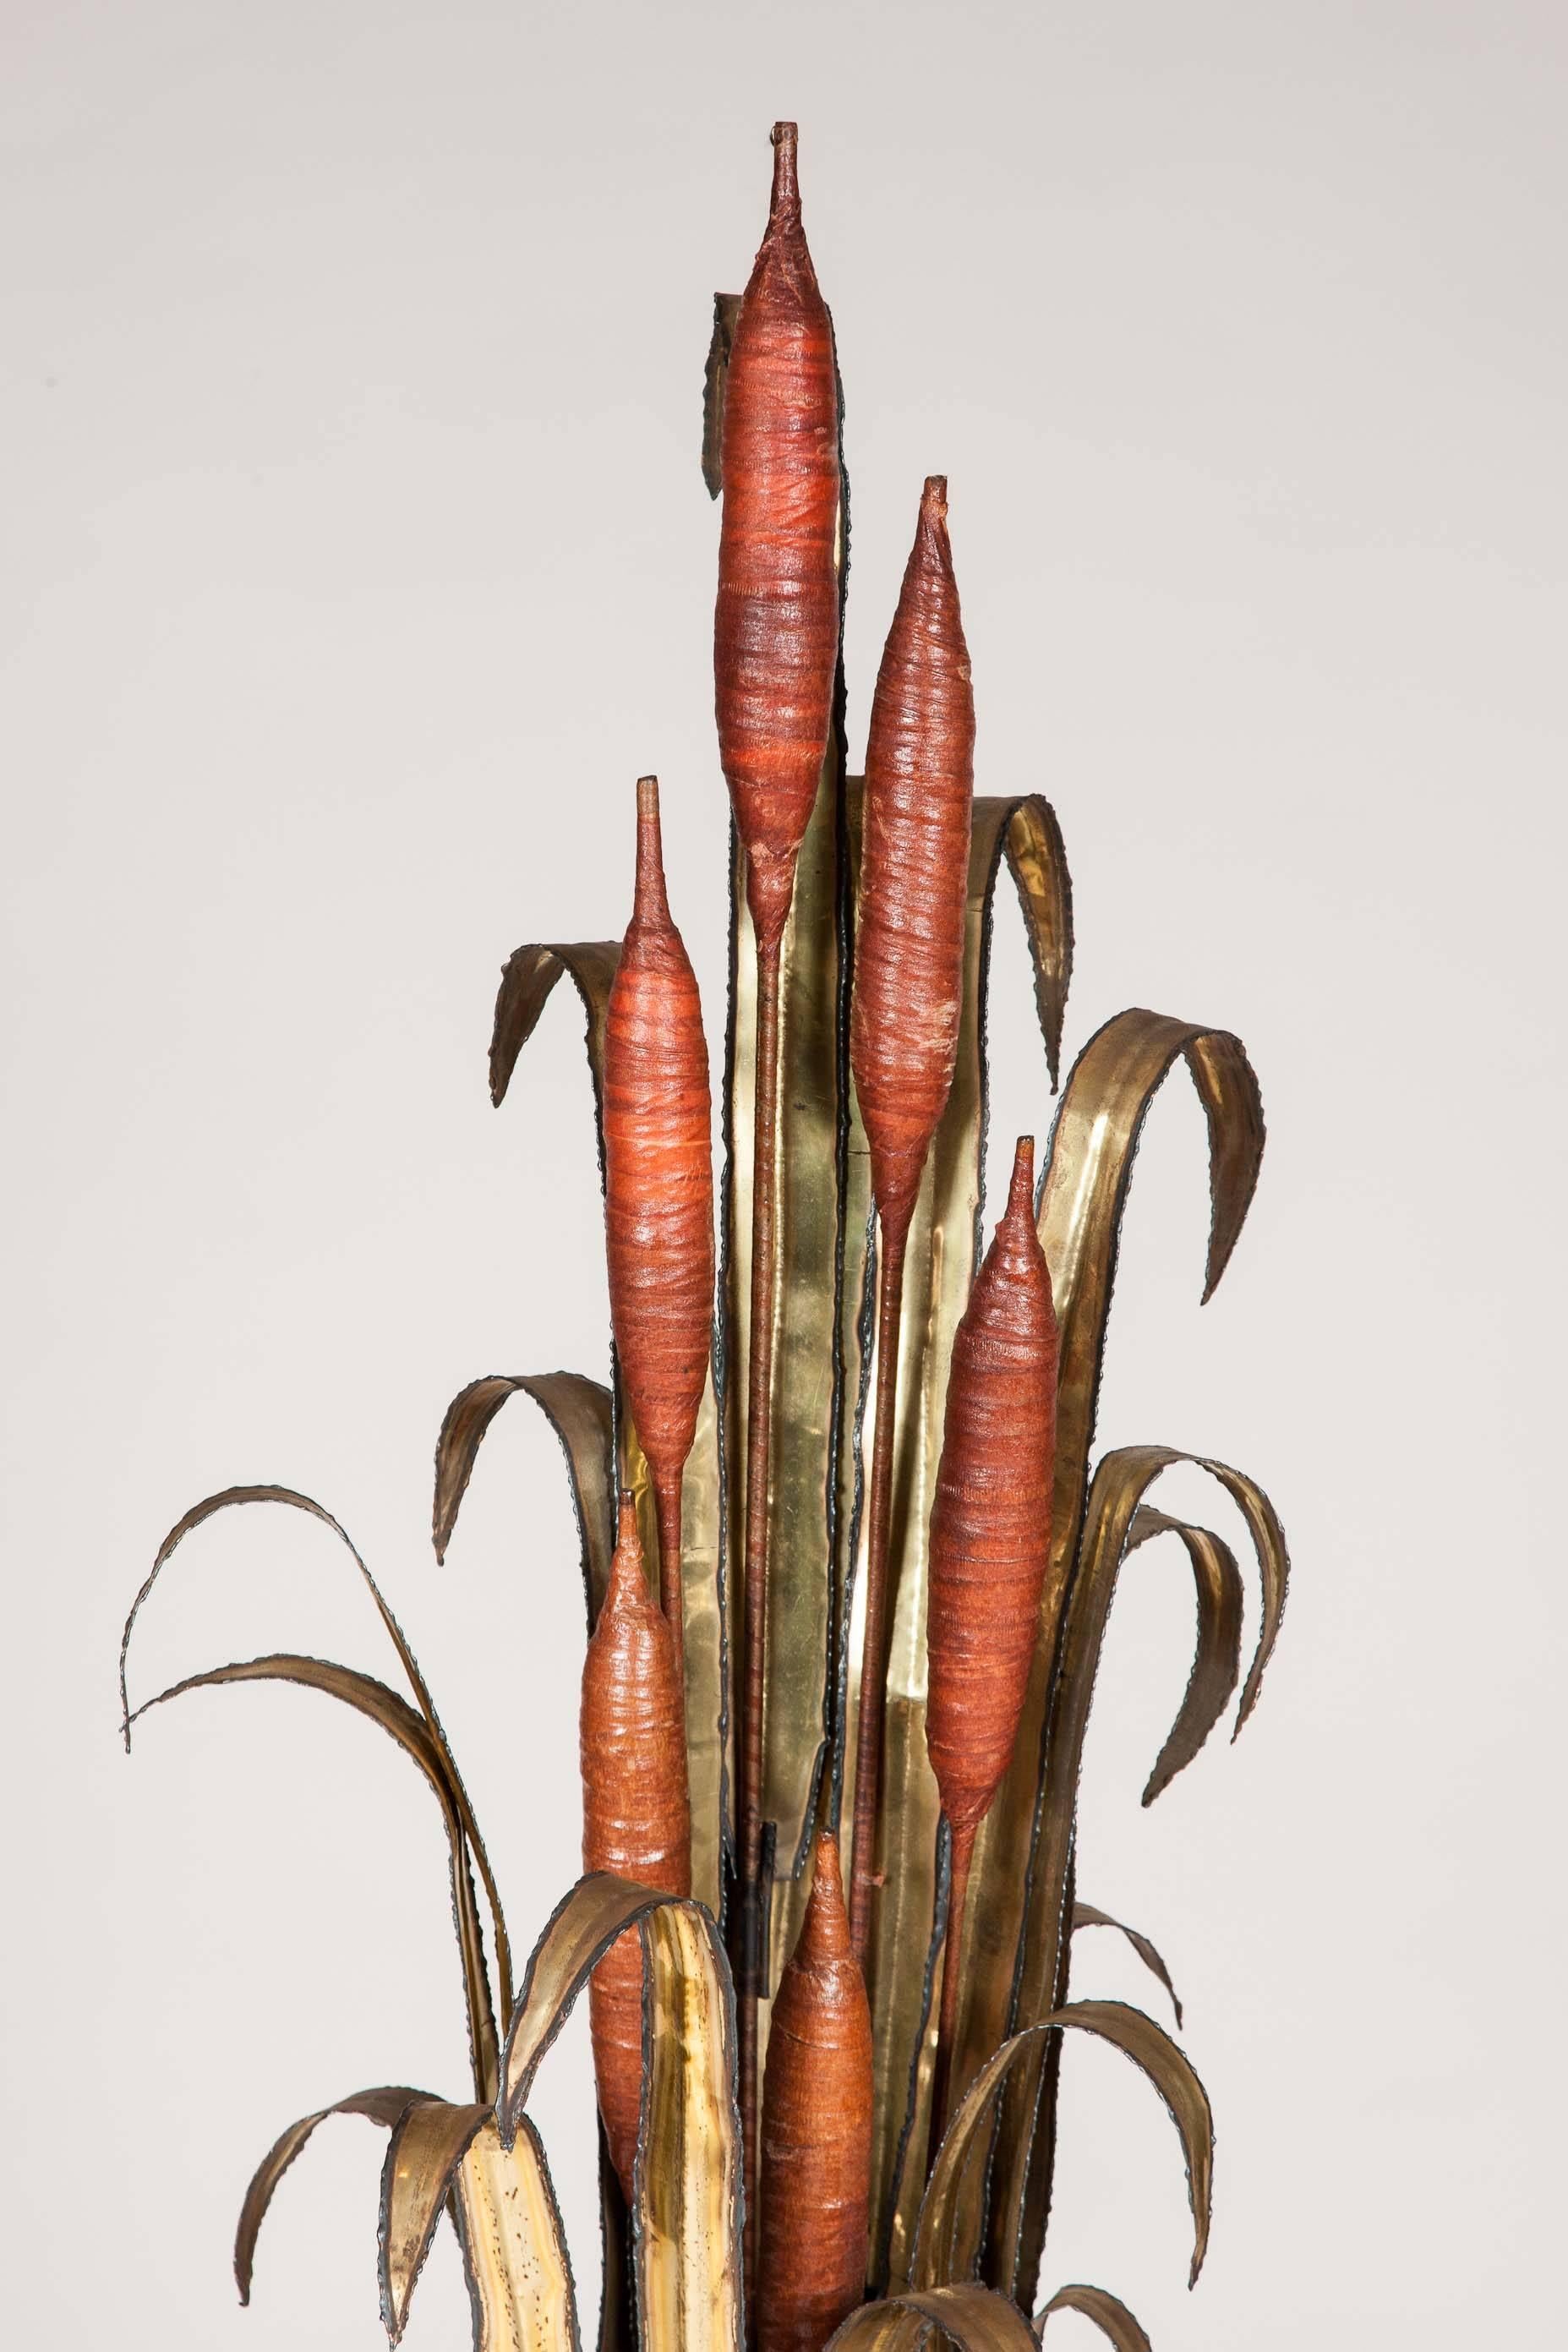 An unusual standing lamp of bull rushes/Cattail and waterlilies with flame cut leaves and resin peddles, attributed to Maison Jansen of Paris.

The Paris-based Maison Jansen was a pioneering design firm active between the 19th and 20th centuries,